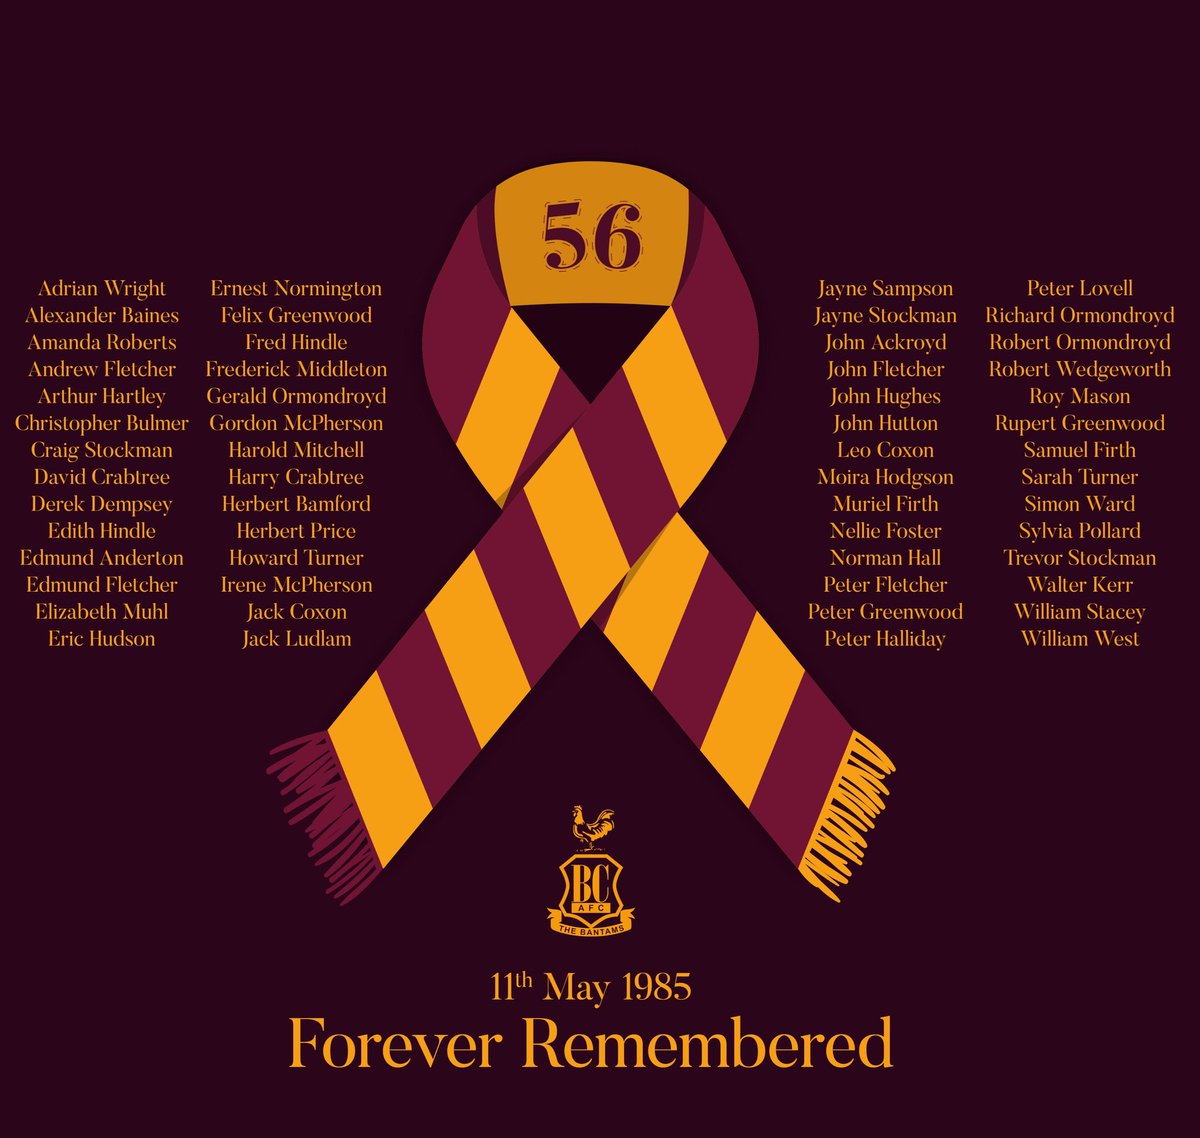 Today (11th May), we remember those who perished in the @officialbantams Valley Parade Fire Disaster 38 years ago. @Bfdcathedral @HSWestYorkshire @LordLtWY @bradfordwest_ @SChads1 @LeedsCofE @toby_howarth @polly_speight @LordMayorBD @bradfordmdc @WeAreBDAT @shipley_ce